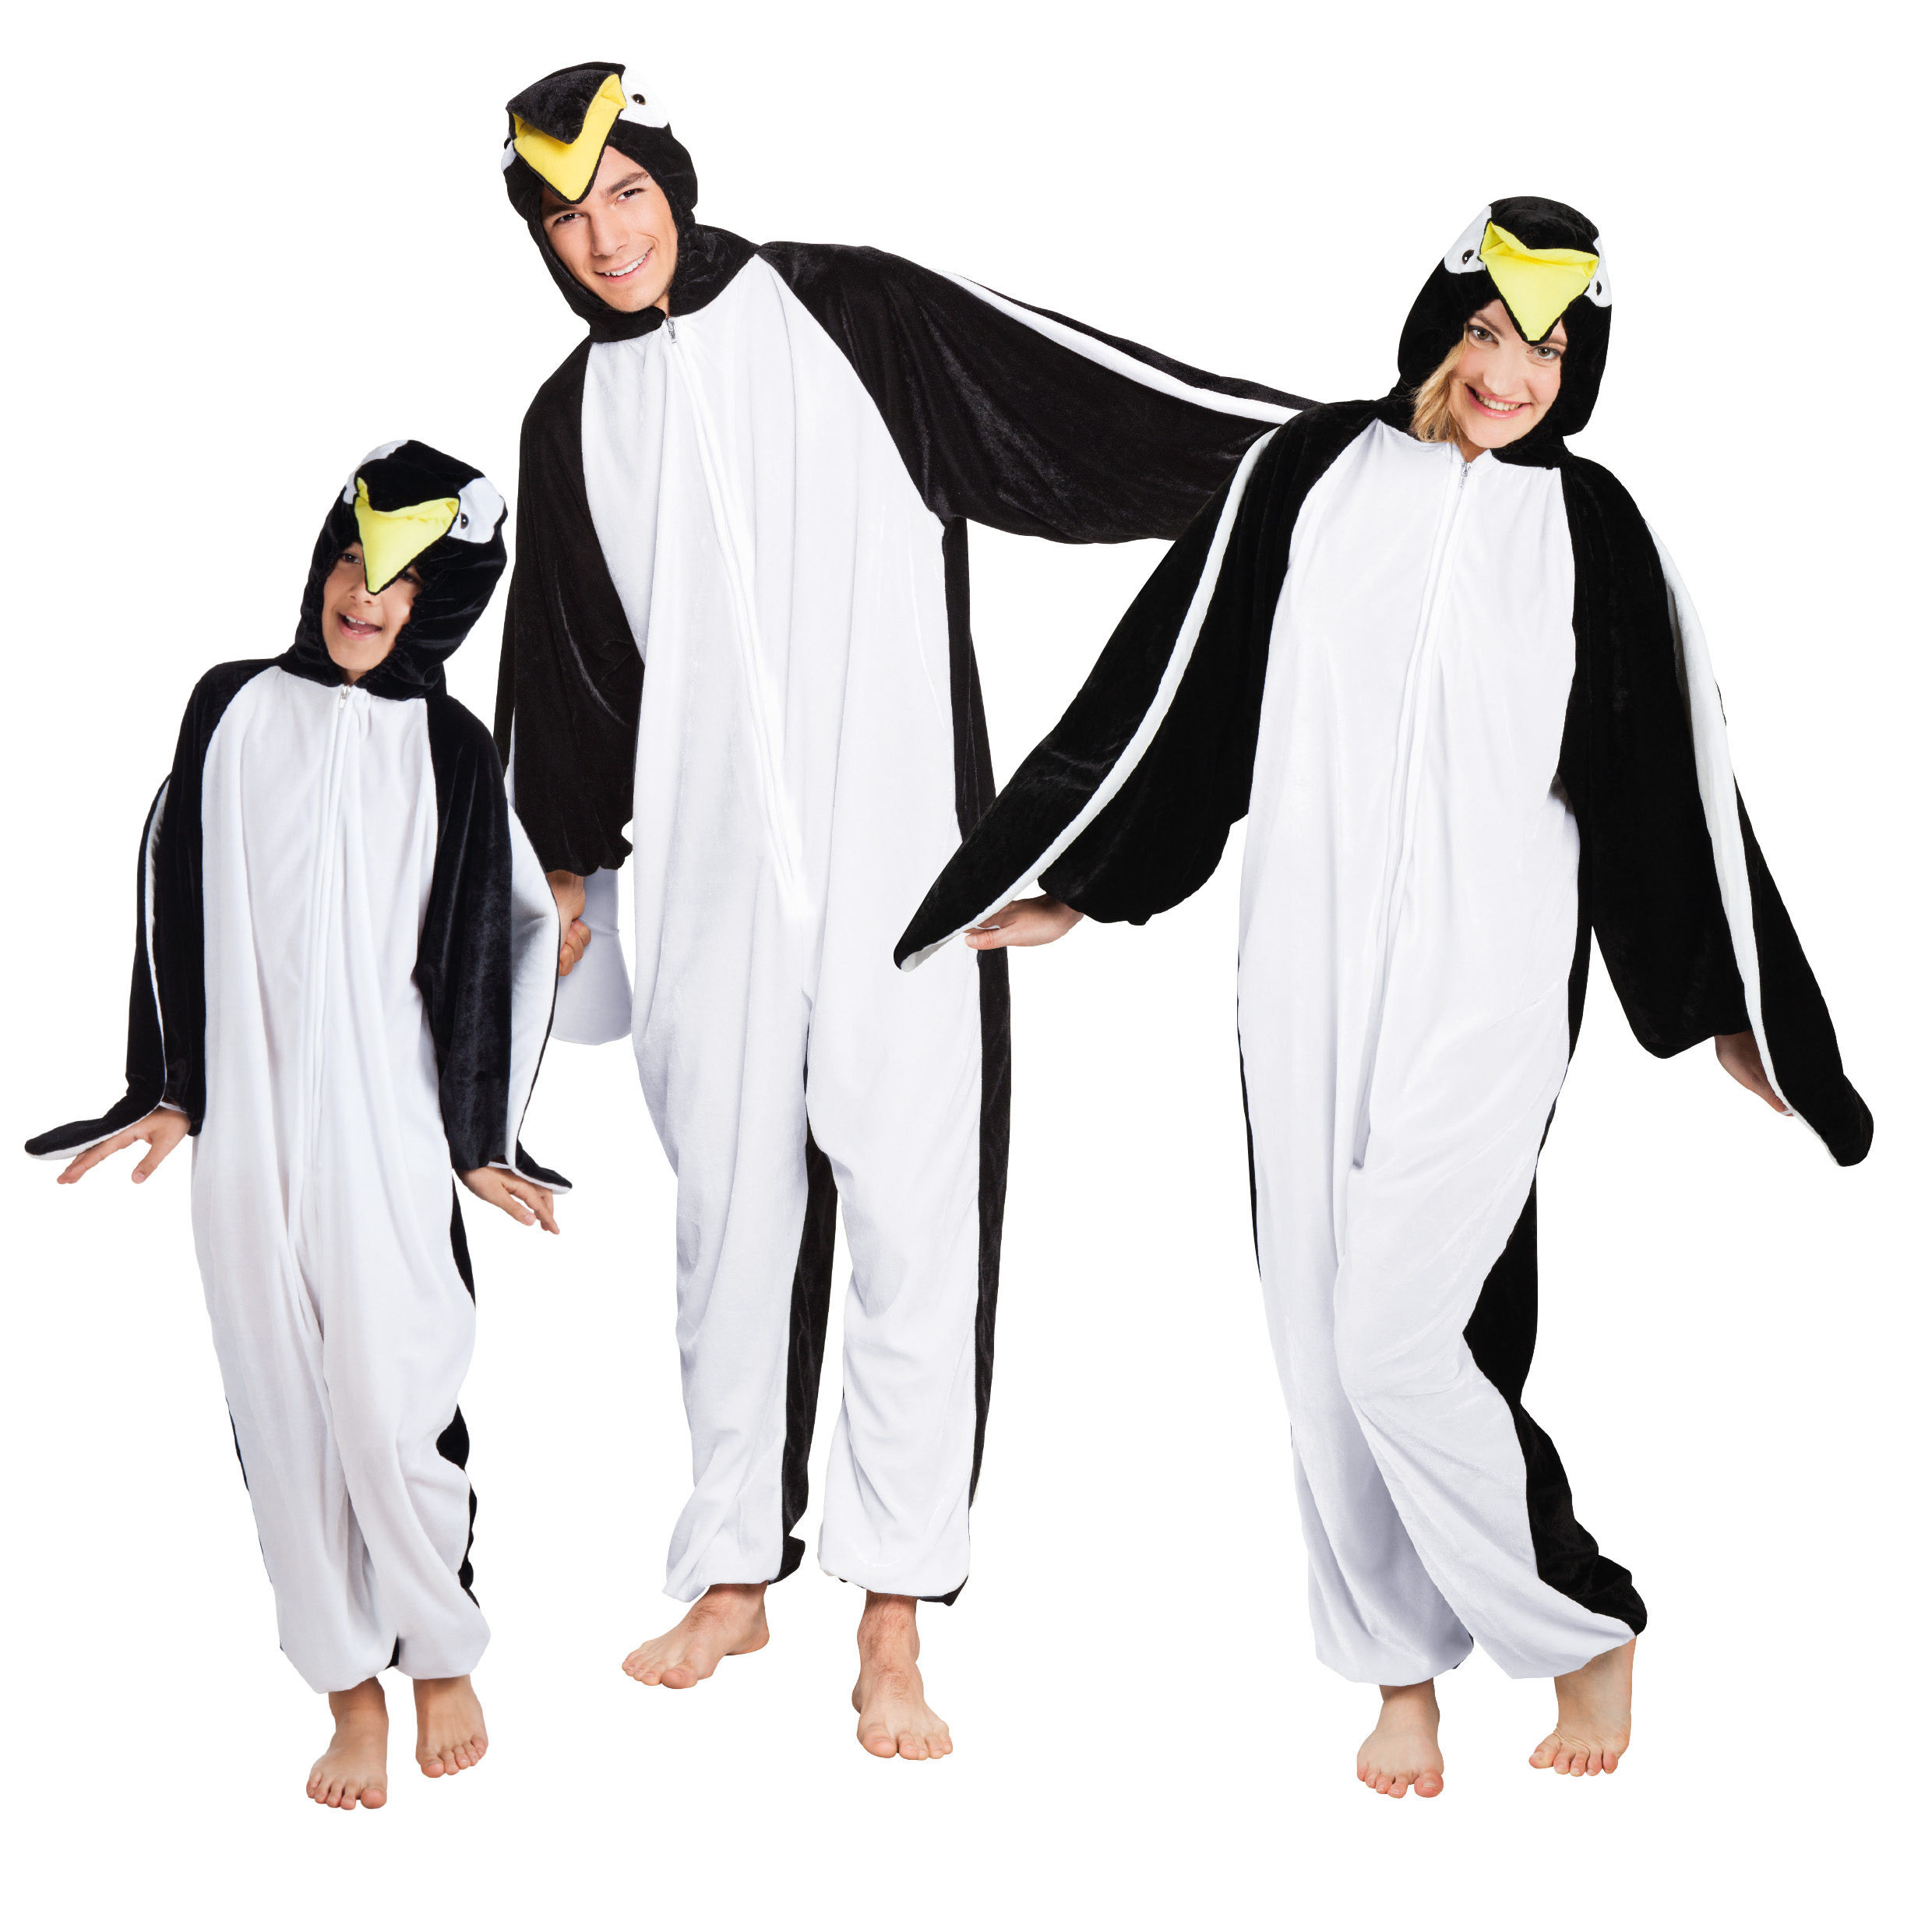 https://www.scherzwelt.de/out/pictures/master/product/1/paarkostme-pinguin.jpg